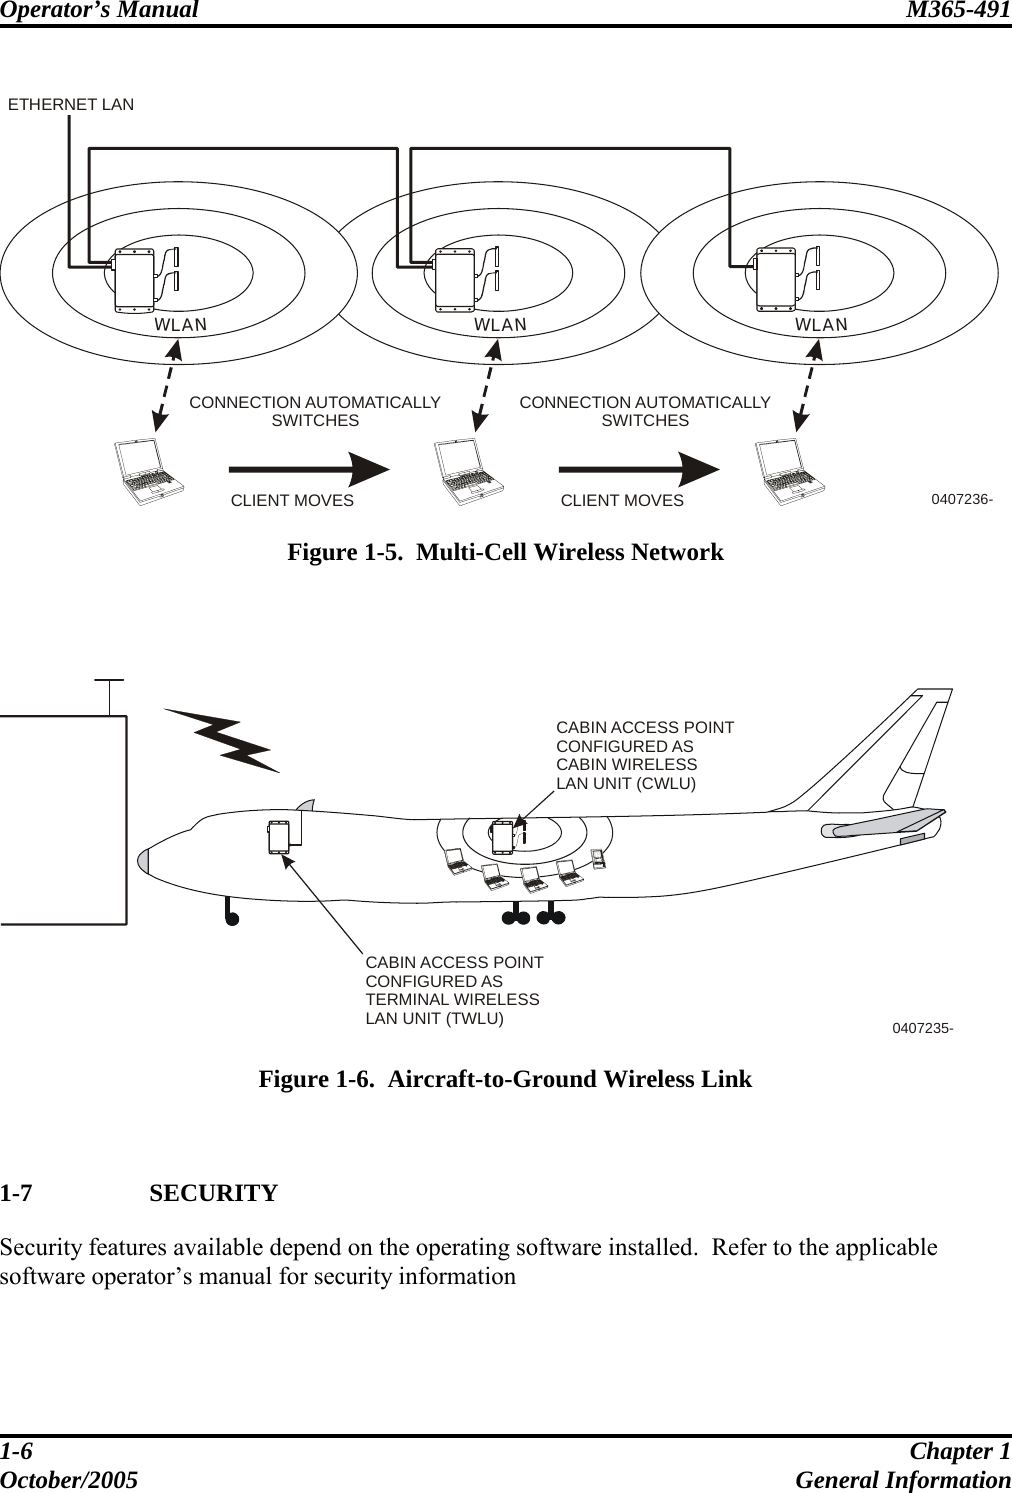 Operator’s Manual  M365-491   1-6  Chapter 1 October/2005 General Information  0407236-WLANWLANWLANETHERNET LANCLIENT MOVES CLIENT MOVESCONNECTION AUTOMATICALLYSWITCHES CONNECTION AUTOMATICALLYSWITCHES  Figure 1-5.  Multi-Cell Wireless Network    0407235-CABIN ACCESS POINTCONFIGURED ASCABIN WIRELESSLAN UNIT (CWLU)CABIN ACCESS POINTCONFIGURED ASTERMINAL WIRELESSLAN UNIT (TWLU)  Figure 1-6.  Aircraft-to-Ground Wireless Link   1-7  SECURITY Security features available depend on the operating software installed.  Refer to the applicable software operator’s manual for security information  